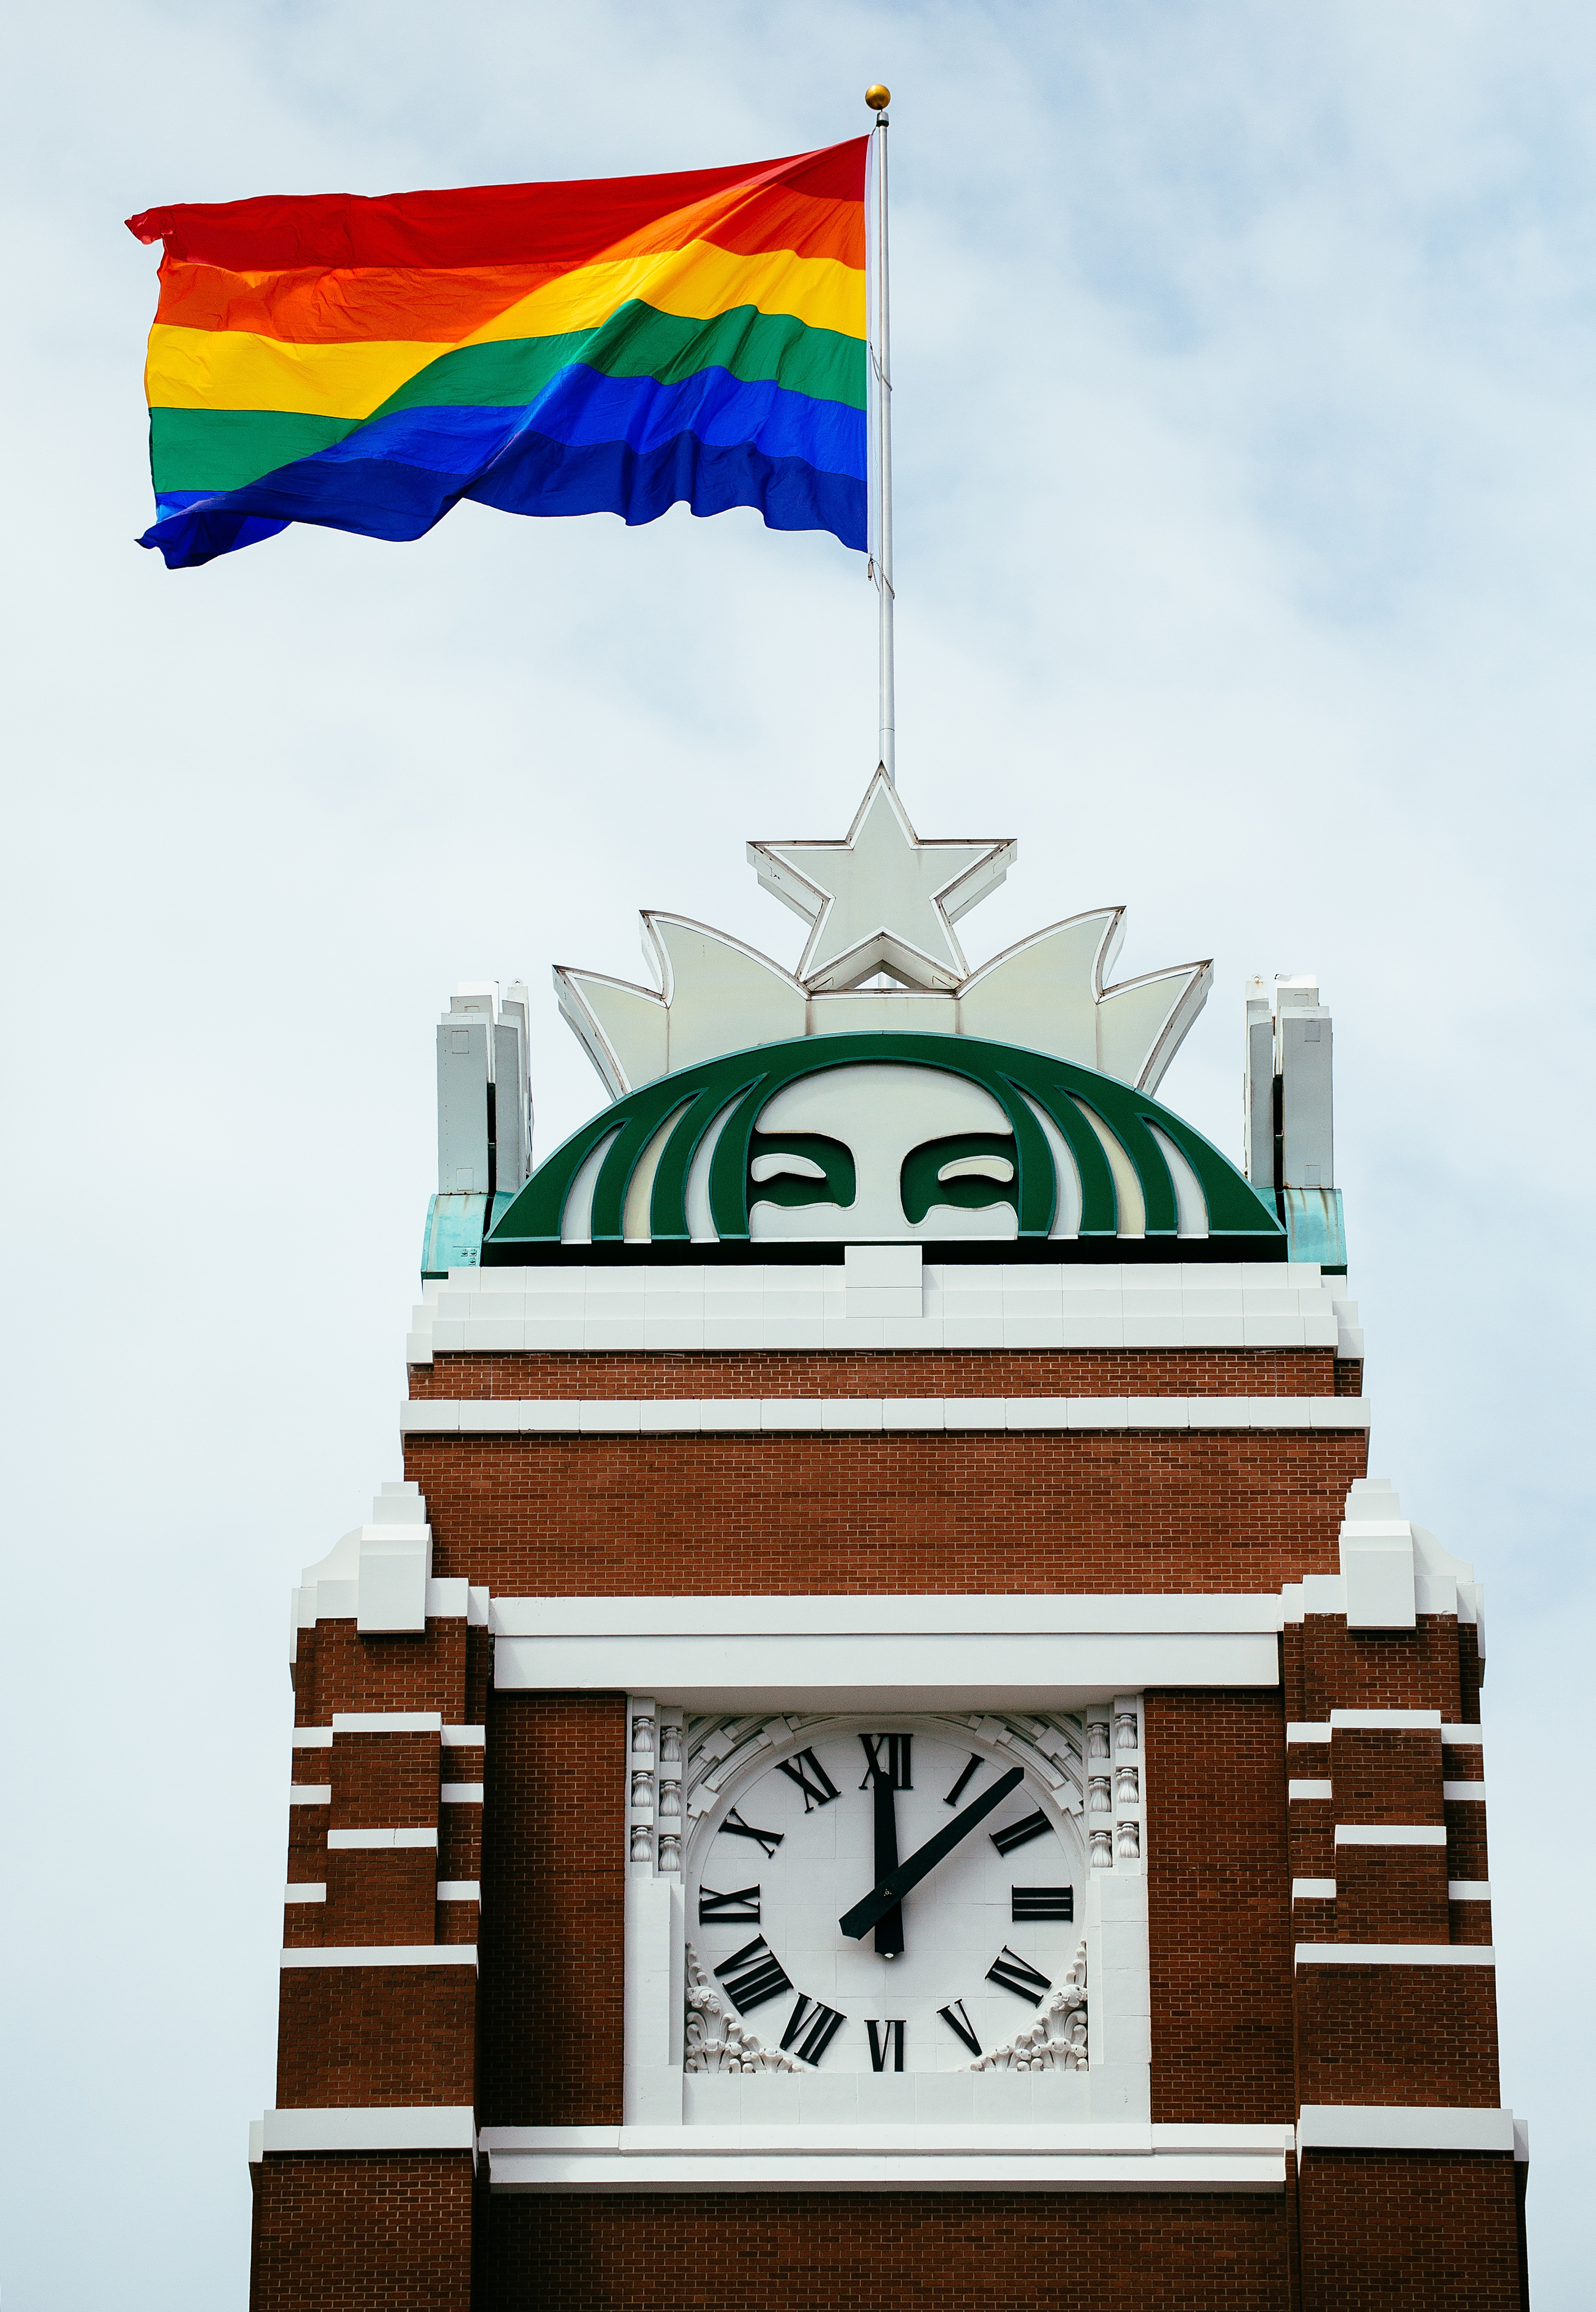 Starbucks marked the 40th anniversary of Seattle Pride by raising an 800-square-foot flag at its corporate headquarters as a group of employees and CEO Howard Schultz watched from below in Seattle on June 23, 2014. (Nate Gowdy)